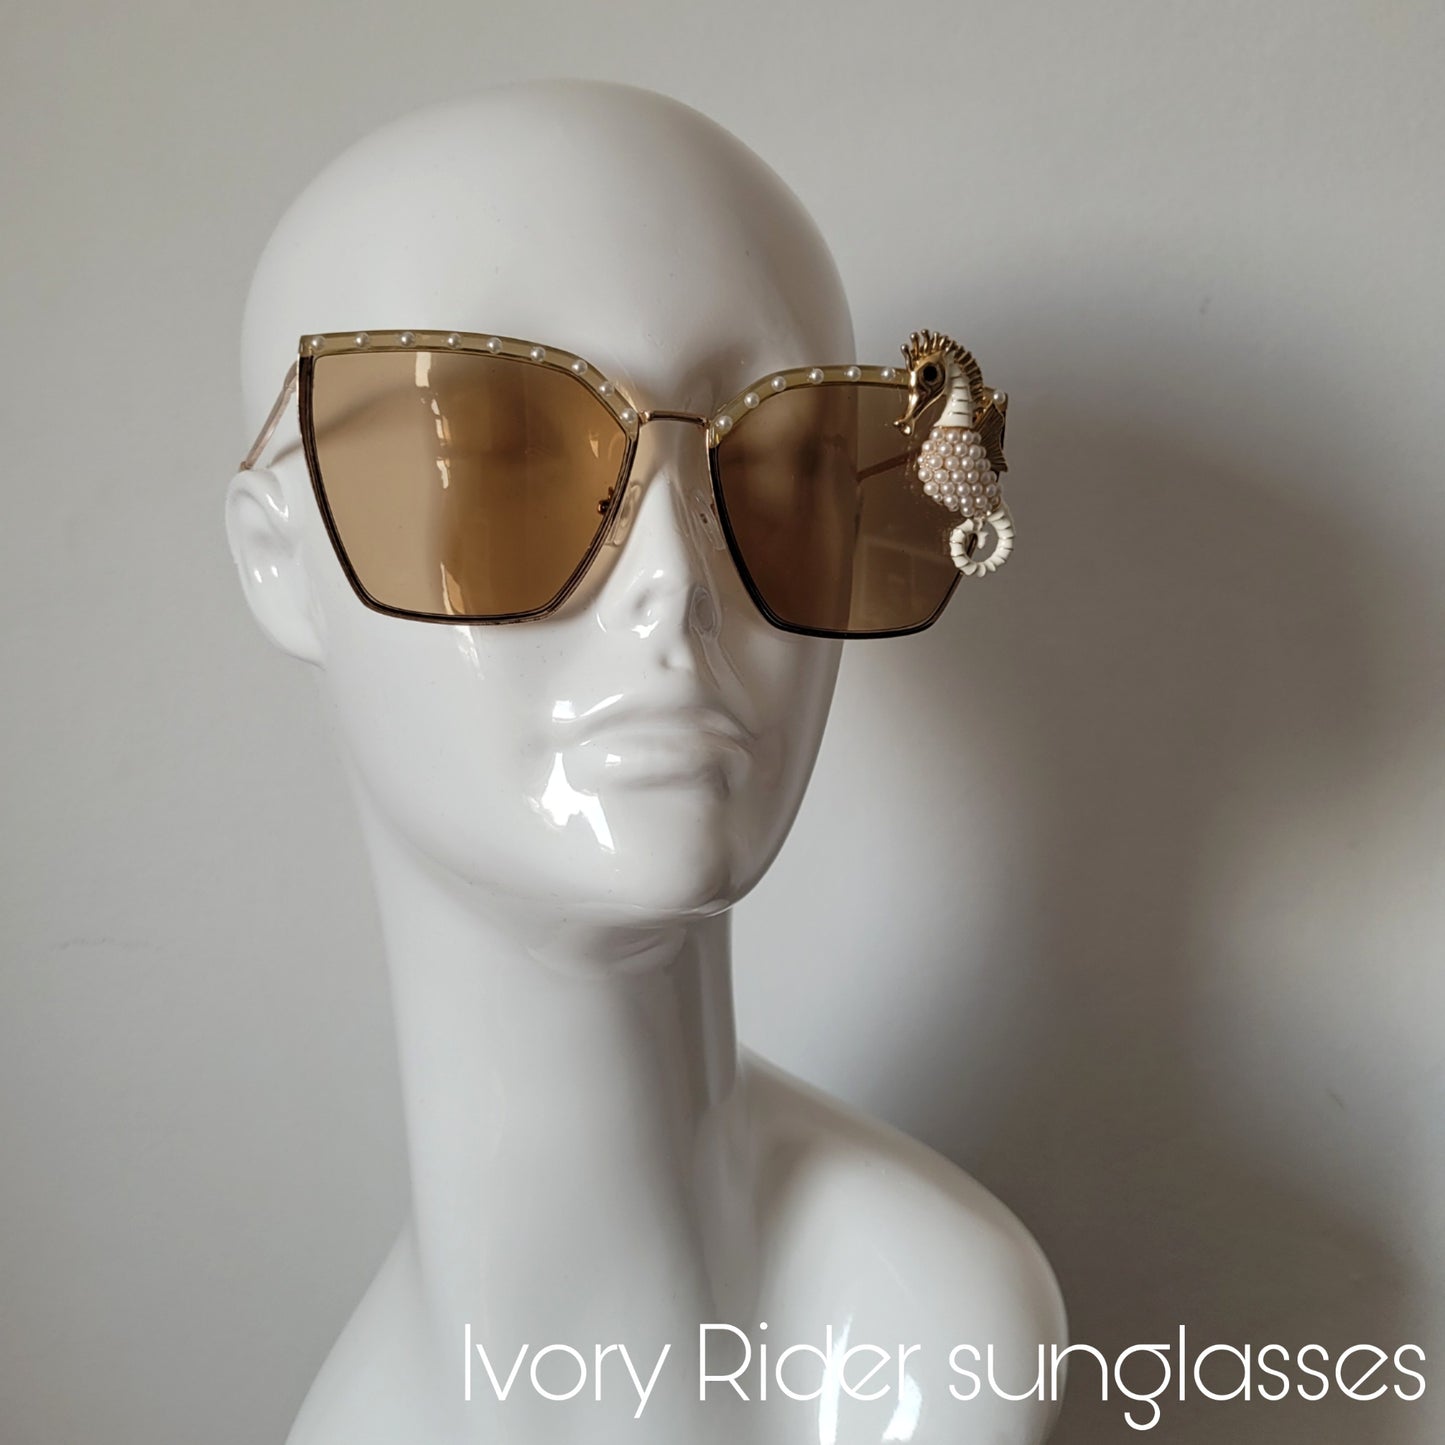 Shifting Depths collection: the Ivory Rider sunglasses